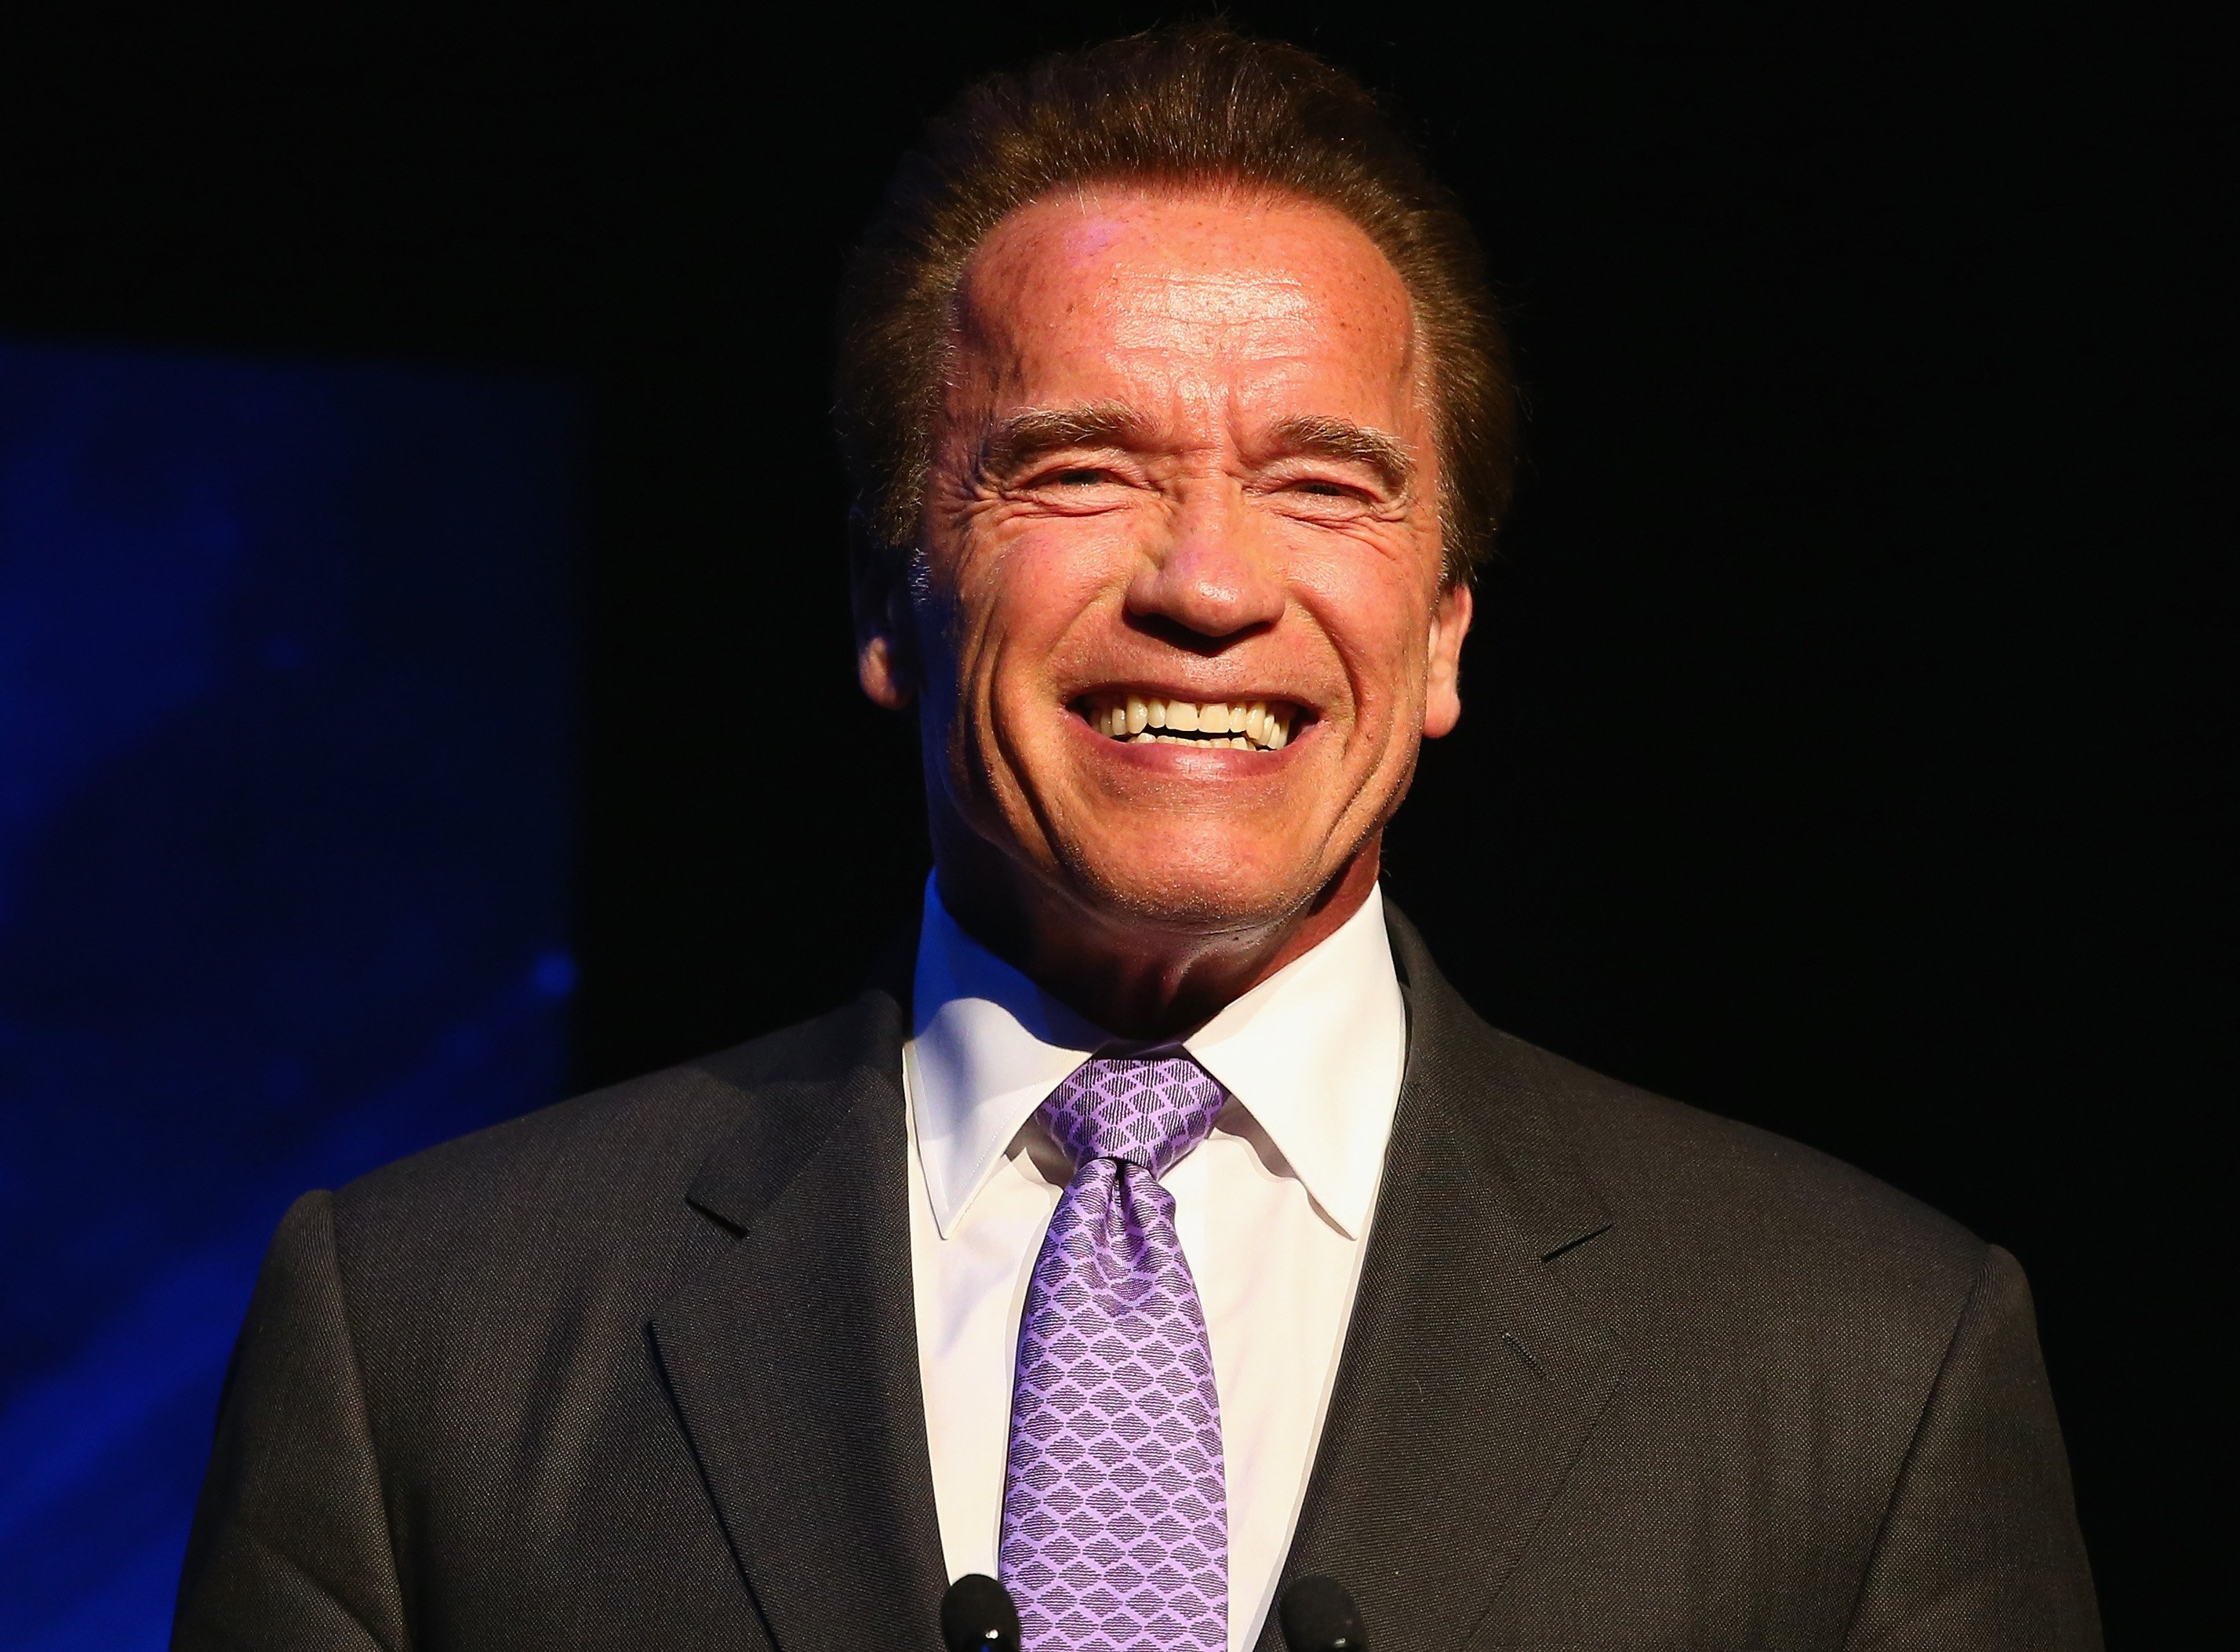 Arnold Schwarzenegger on March 14, 2015 in Melbourne, Australia | Photo: Getty Images